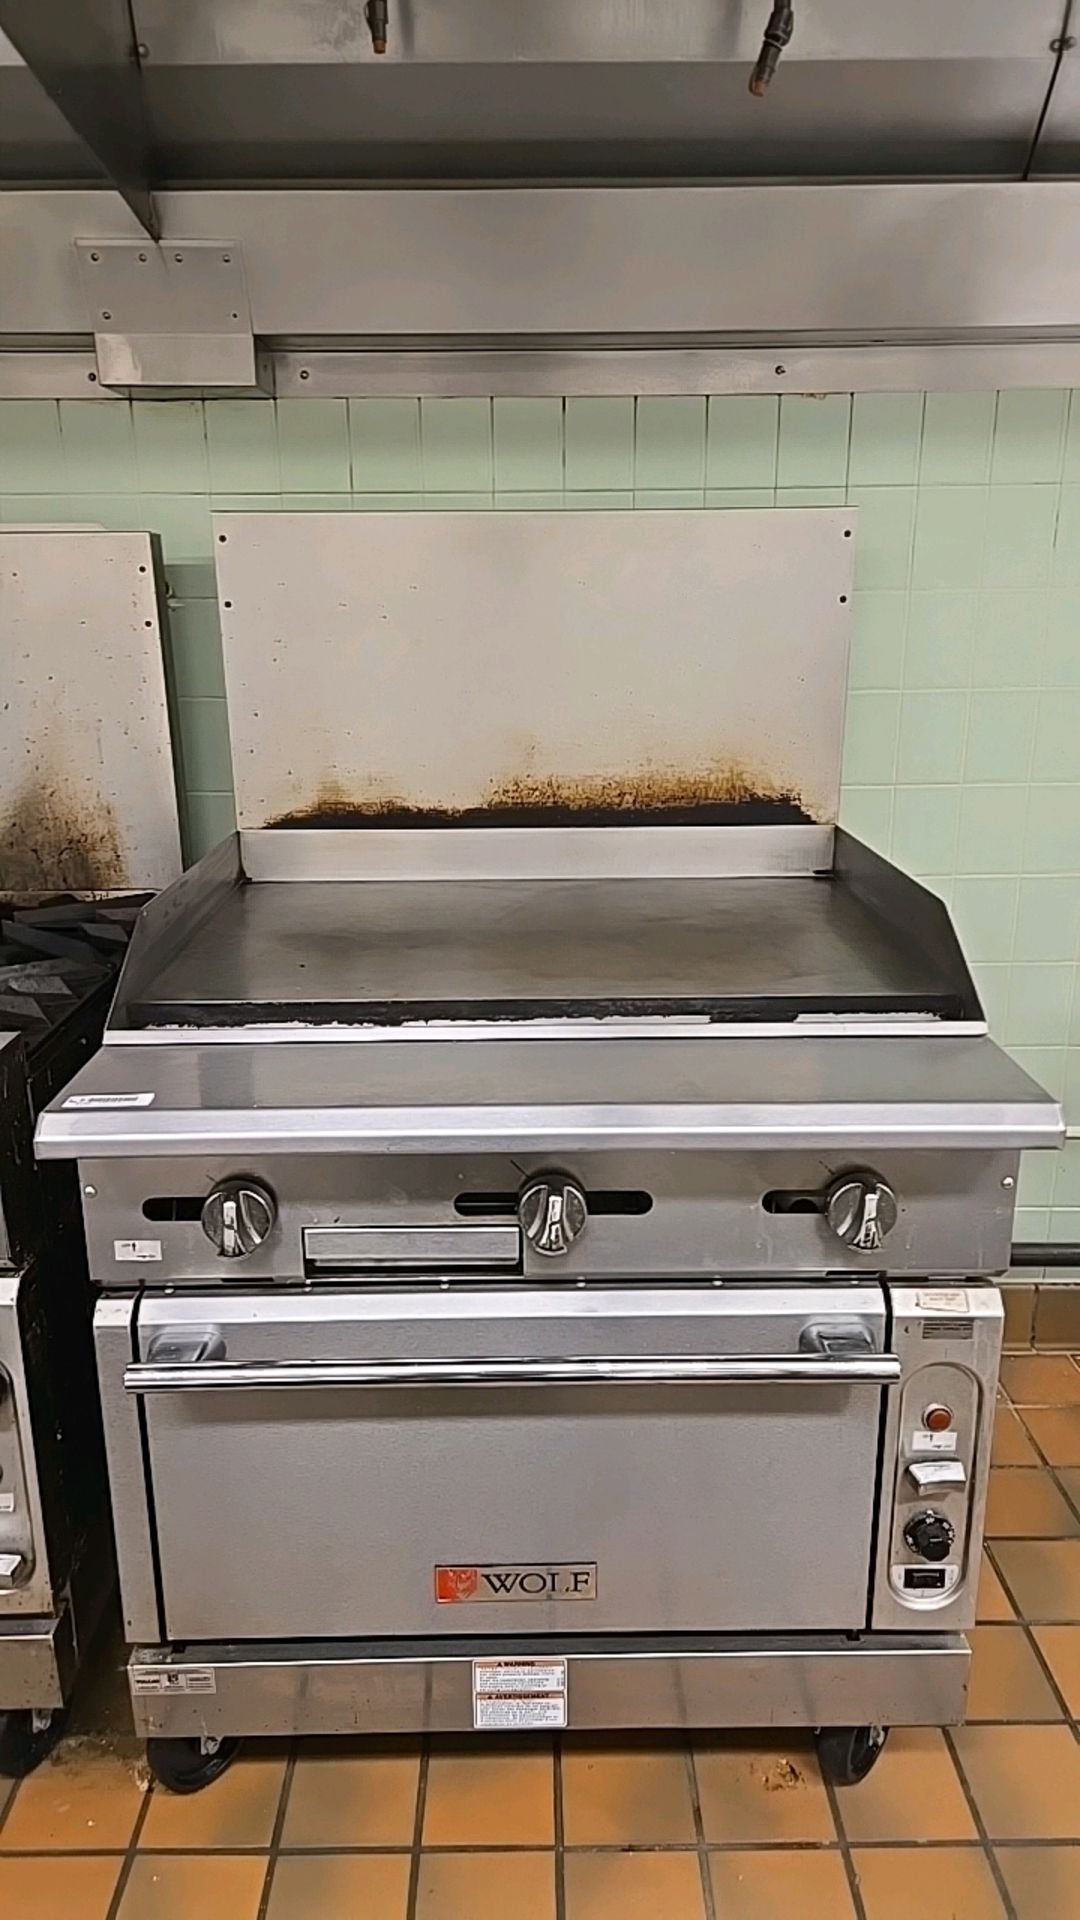 VULCAN/WOLF MODEL NO. VGM36C-500 36" GAS MANUAL RANGE WITH GRIDDLE TOP, OVEN ON WHEELS